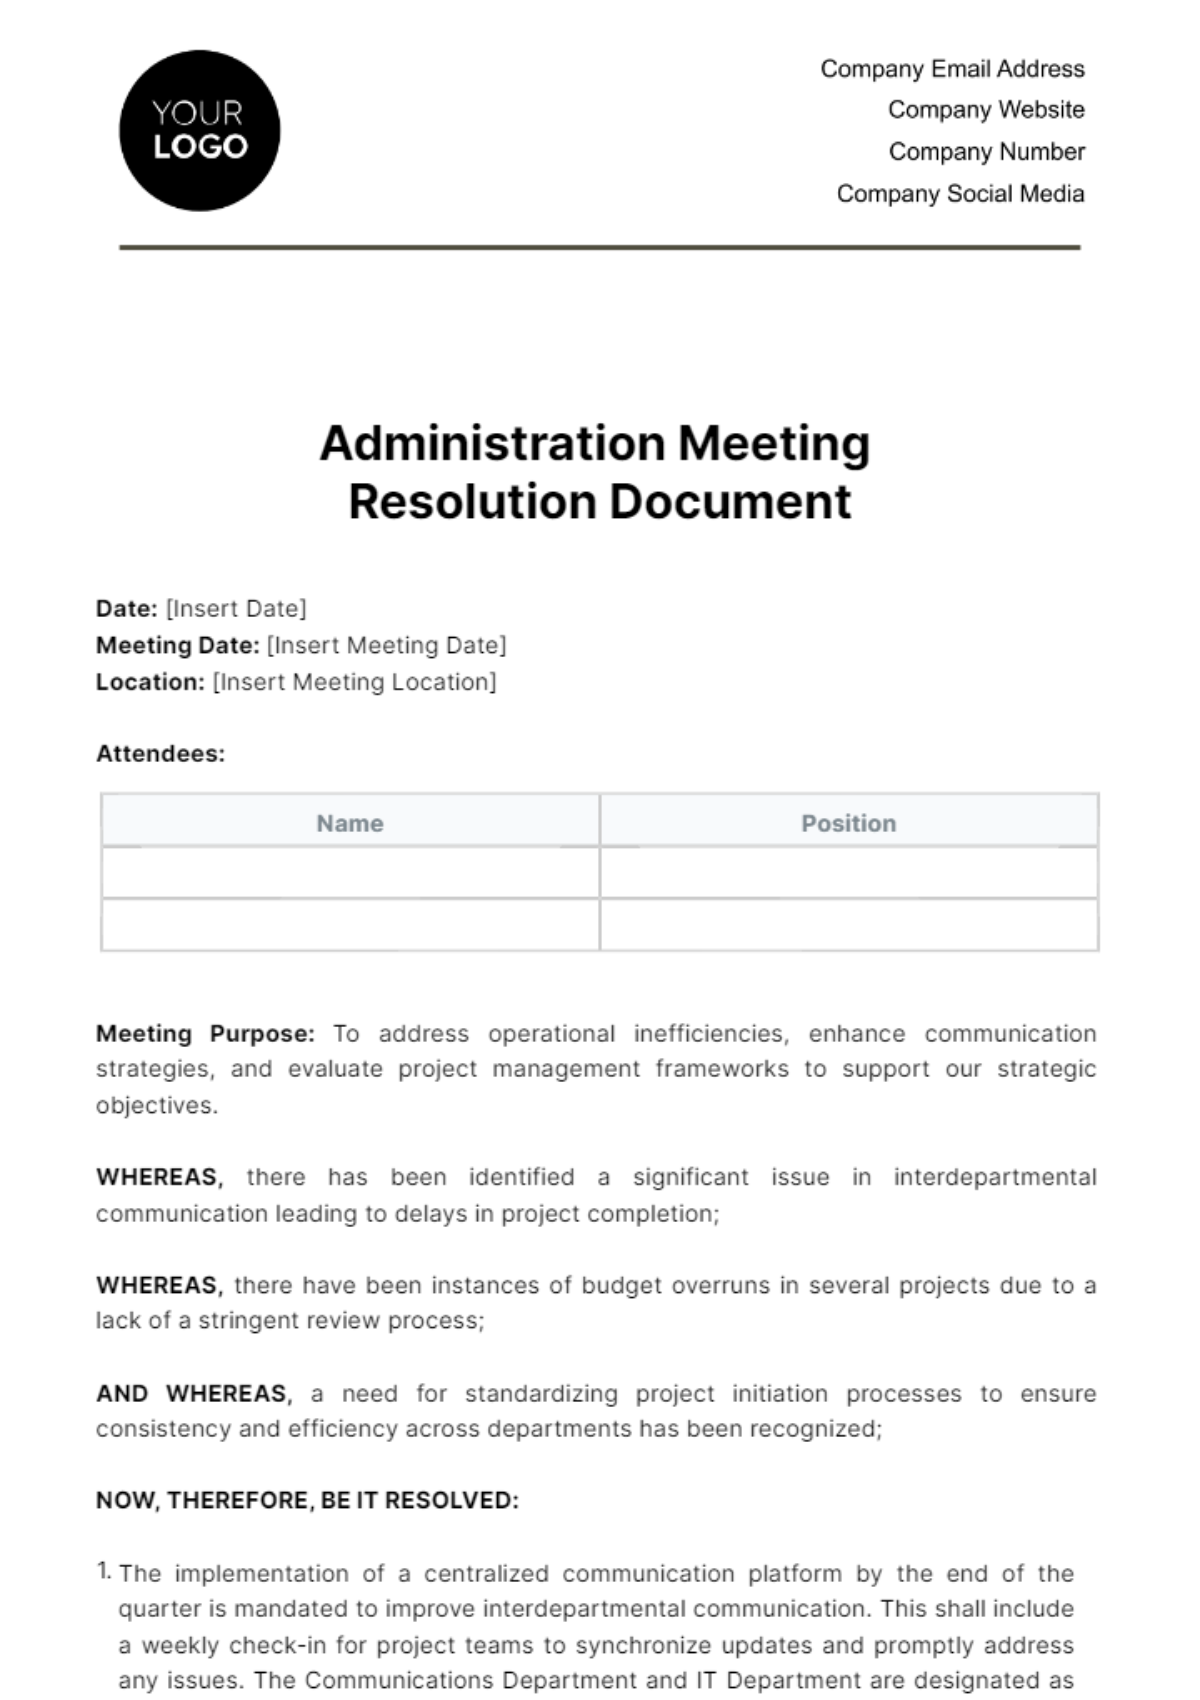 Administration Meeting Resolution Document Template